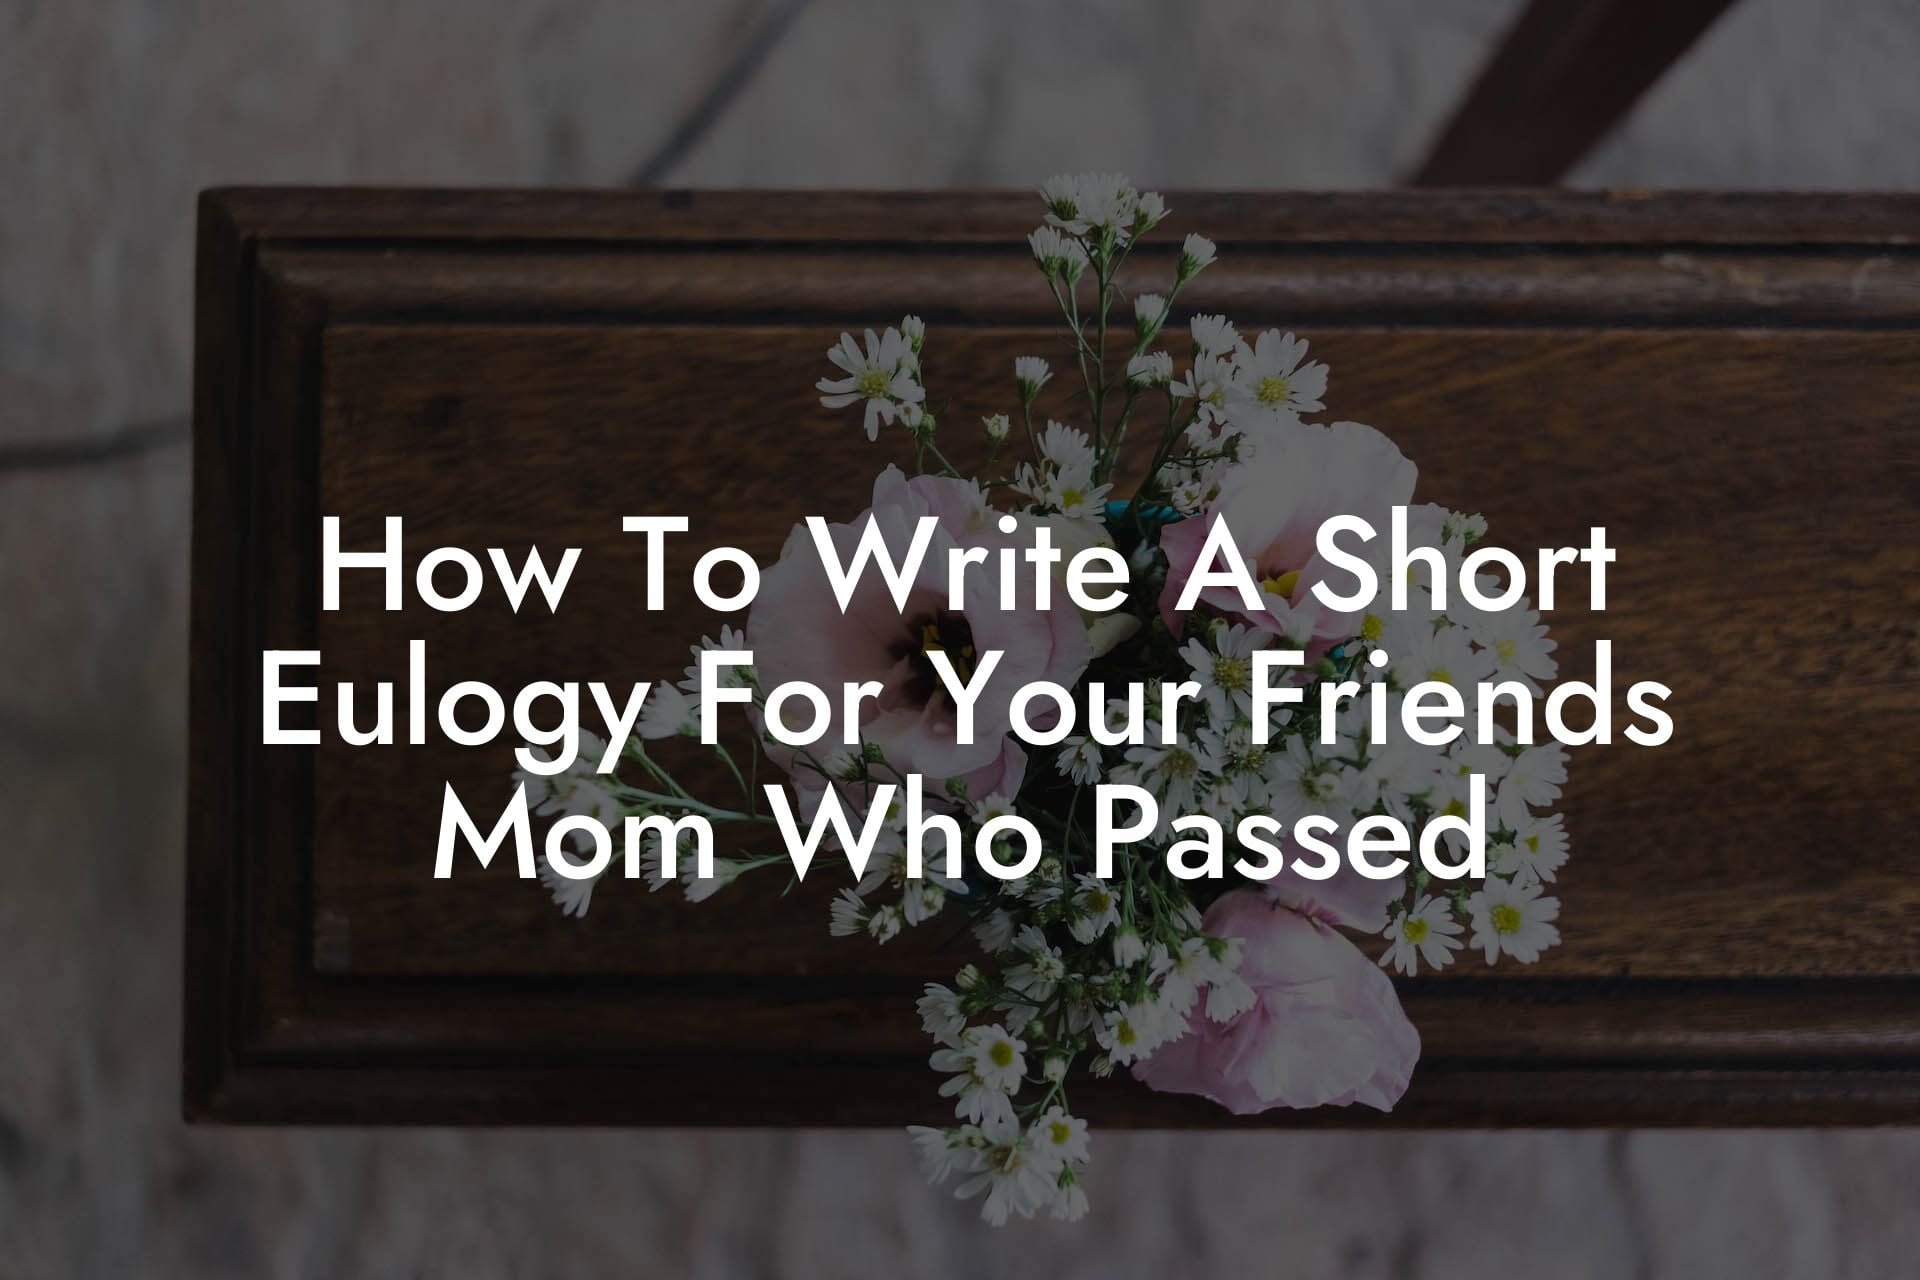 How To Write A Short Eulogy For Your Friends Mom Who Passed